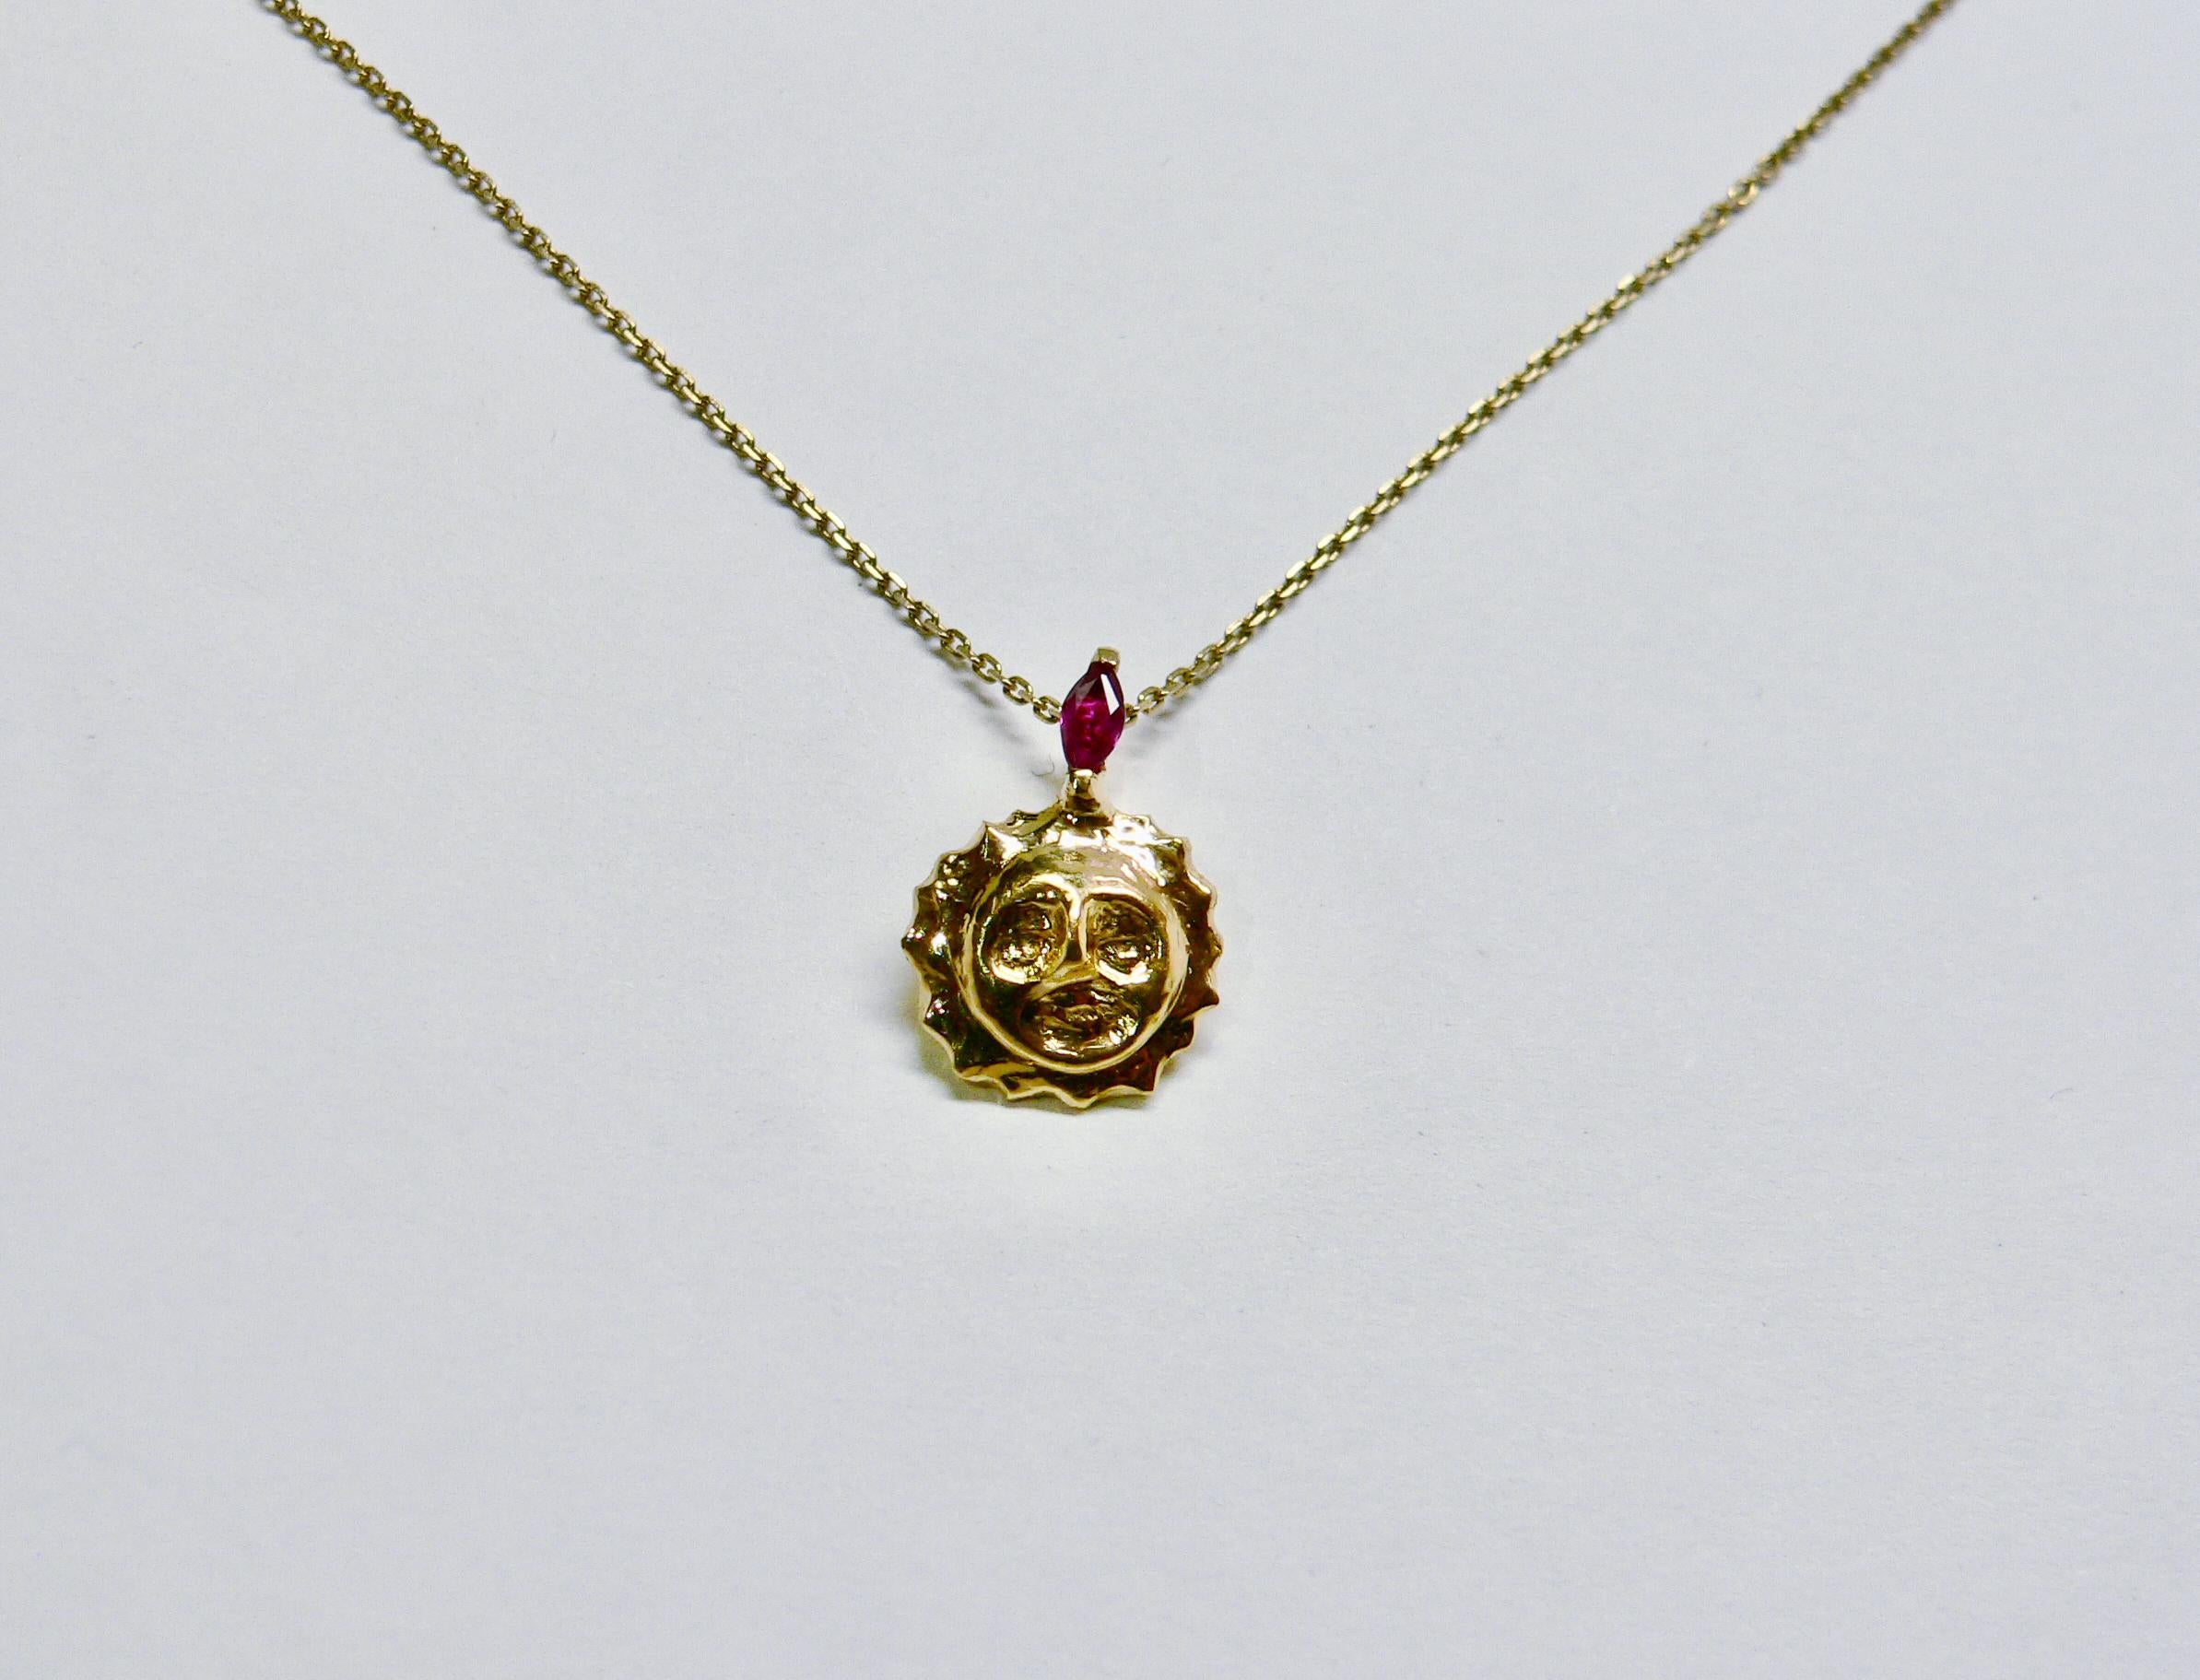 Smiling Sun pendant from Sun and Moon Collection is made of Sterling Silver with 18 Karat gold plated. It is a motif of Sun shining and smiling to us all. And one of its shine is ruby on the top of the sun.

This item is not included chain, 5th and